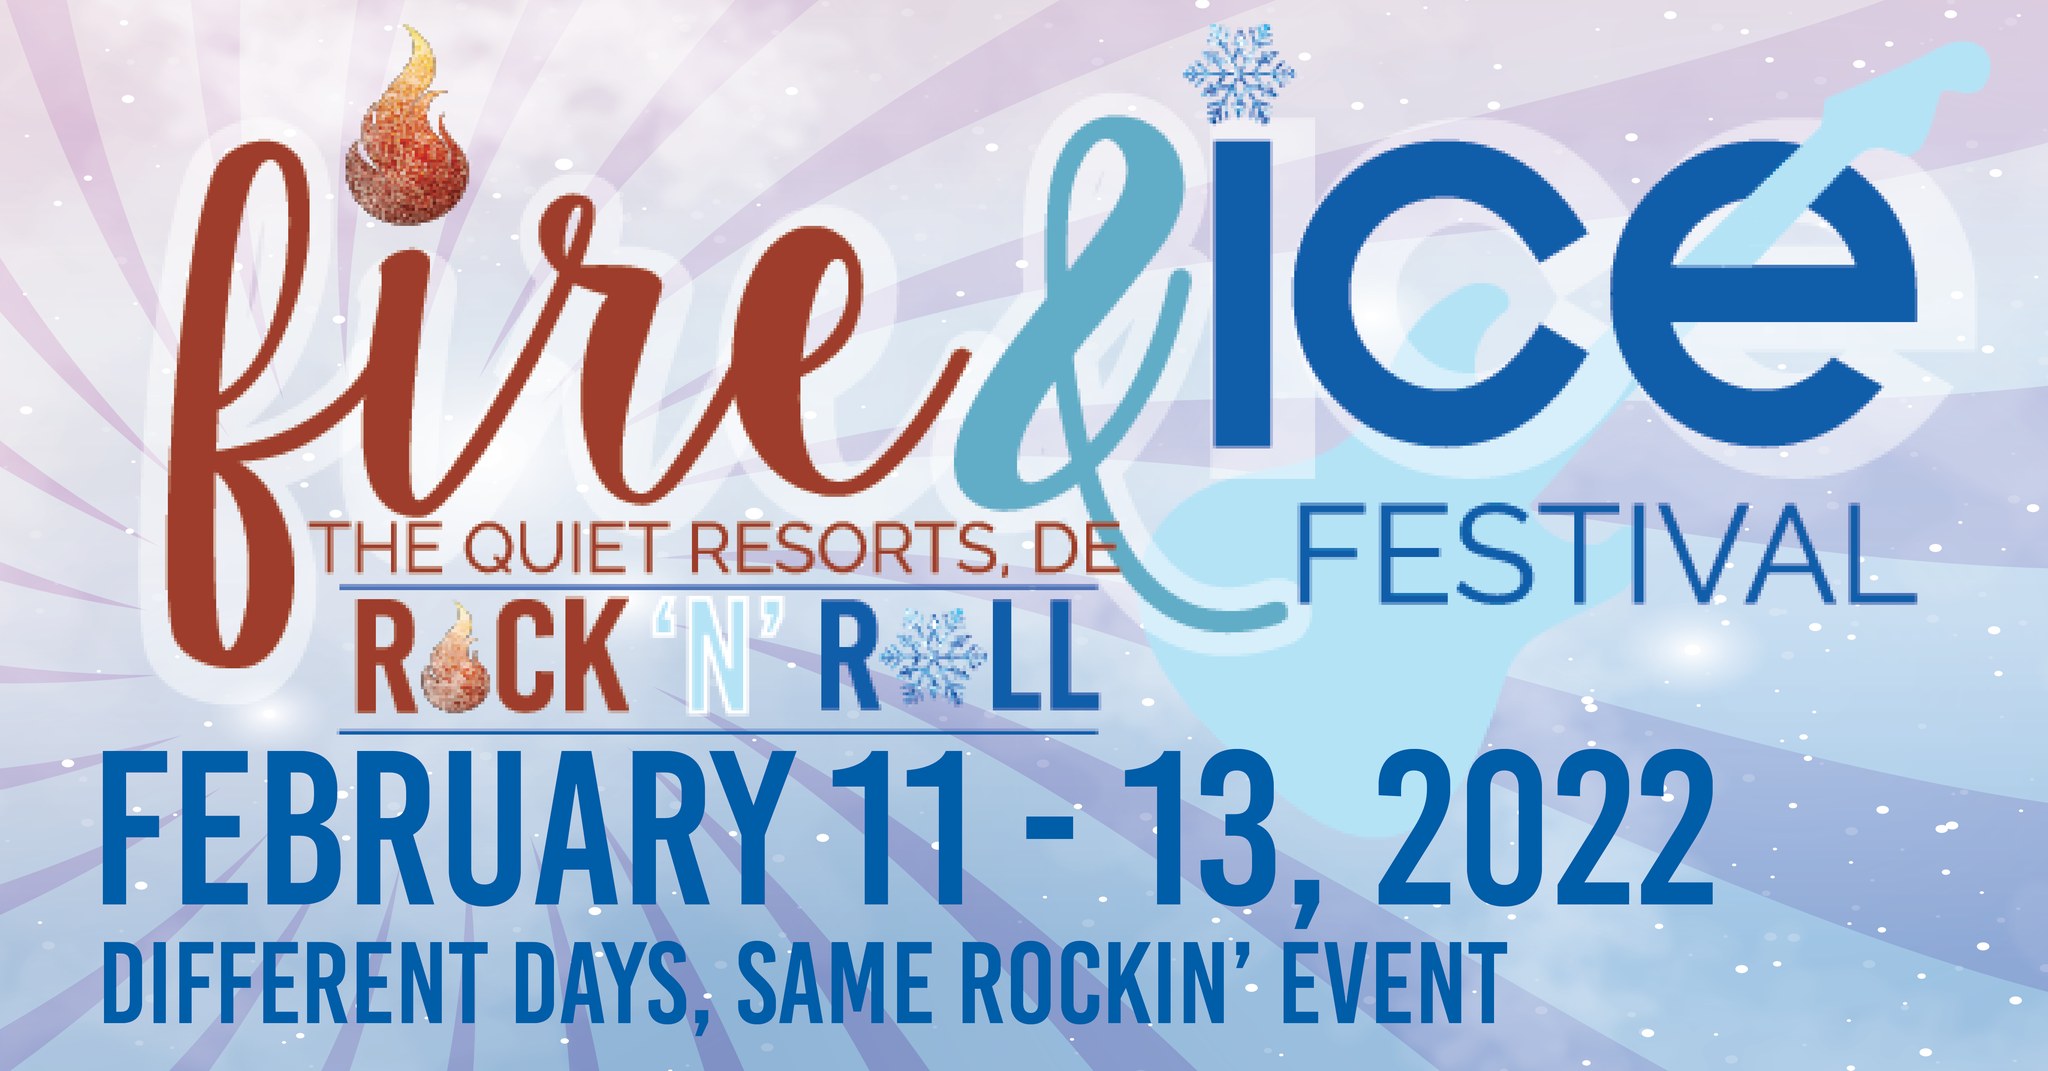 Fire and Ice Festival in Bethany Beach